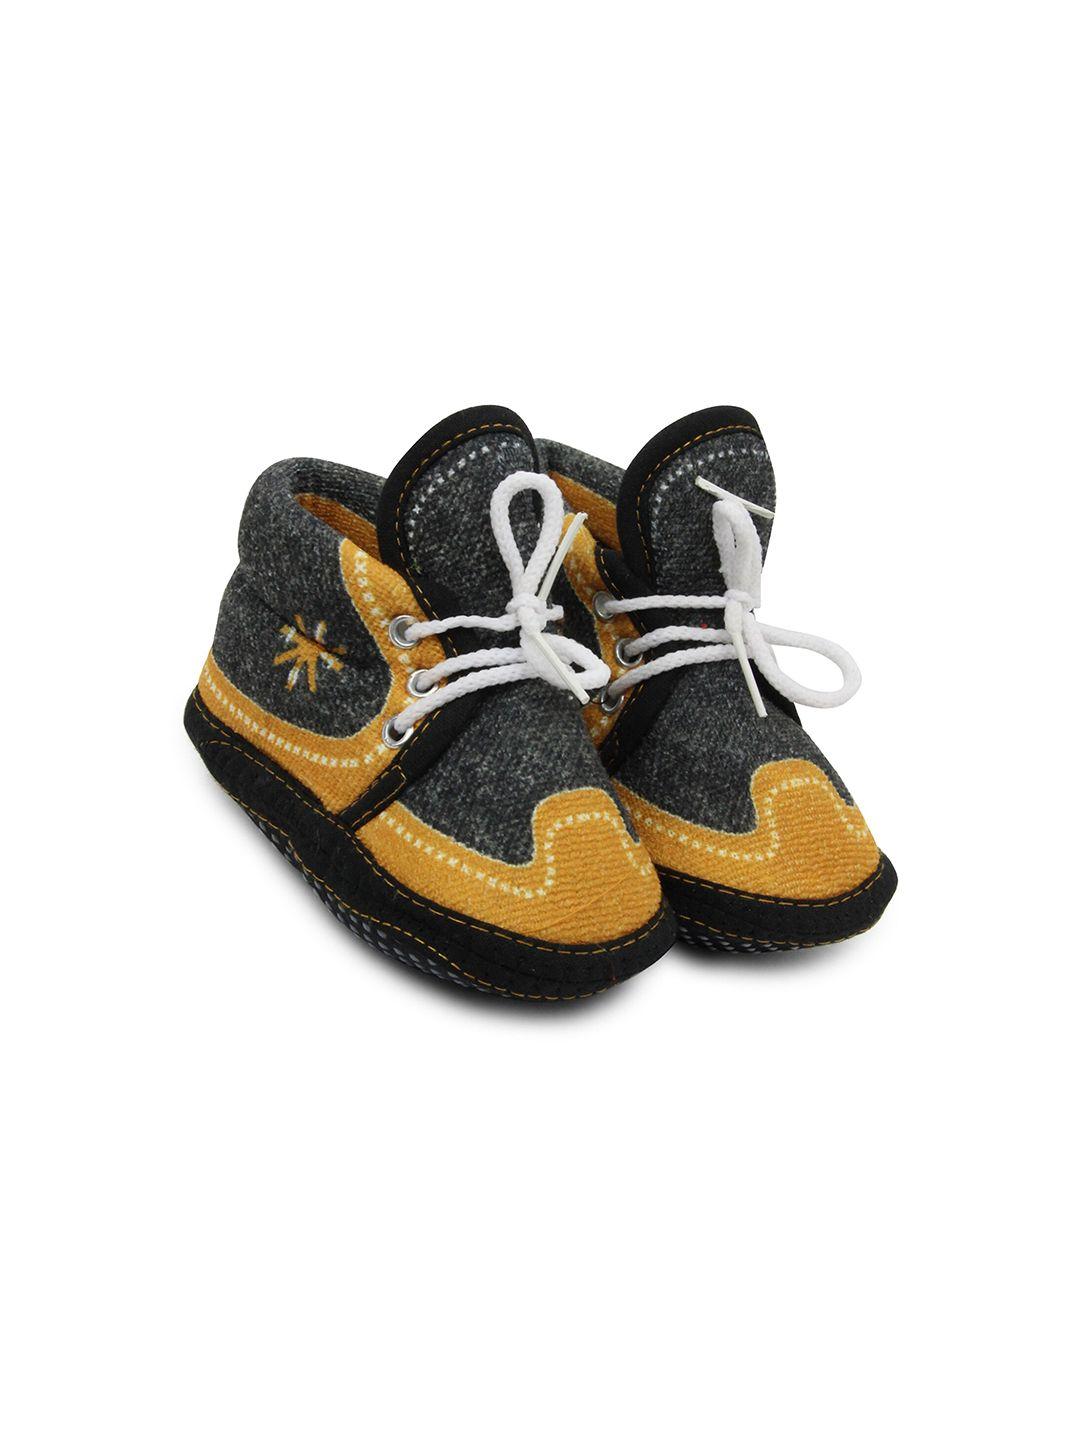 baesd infant anti-slip cotton lace-up booties